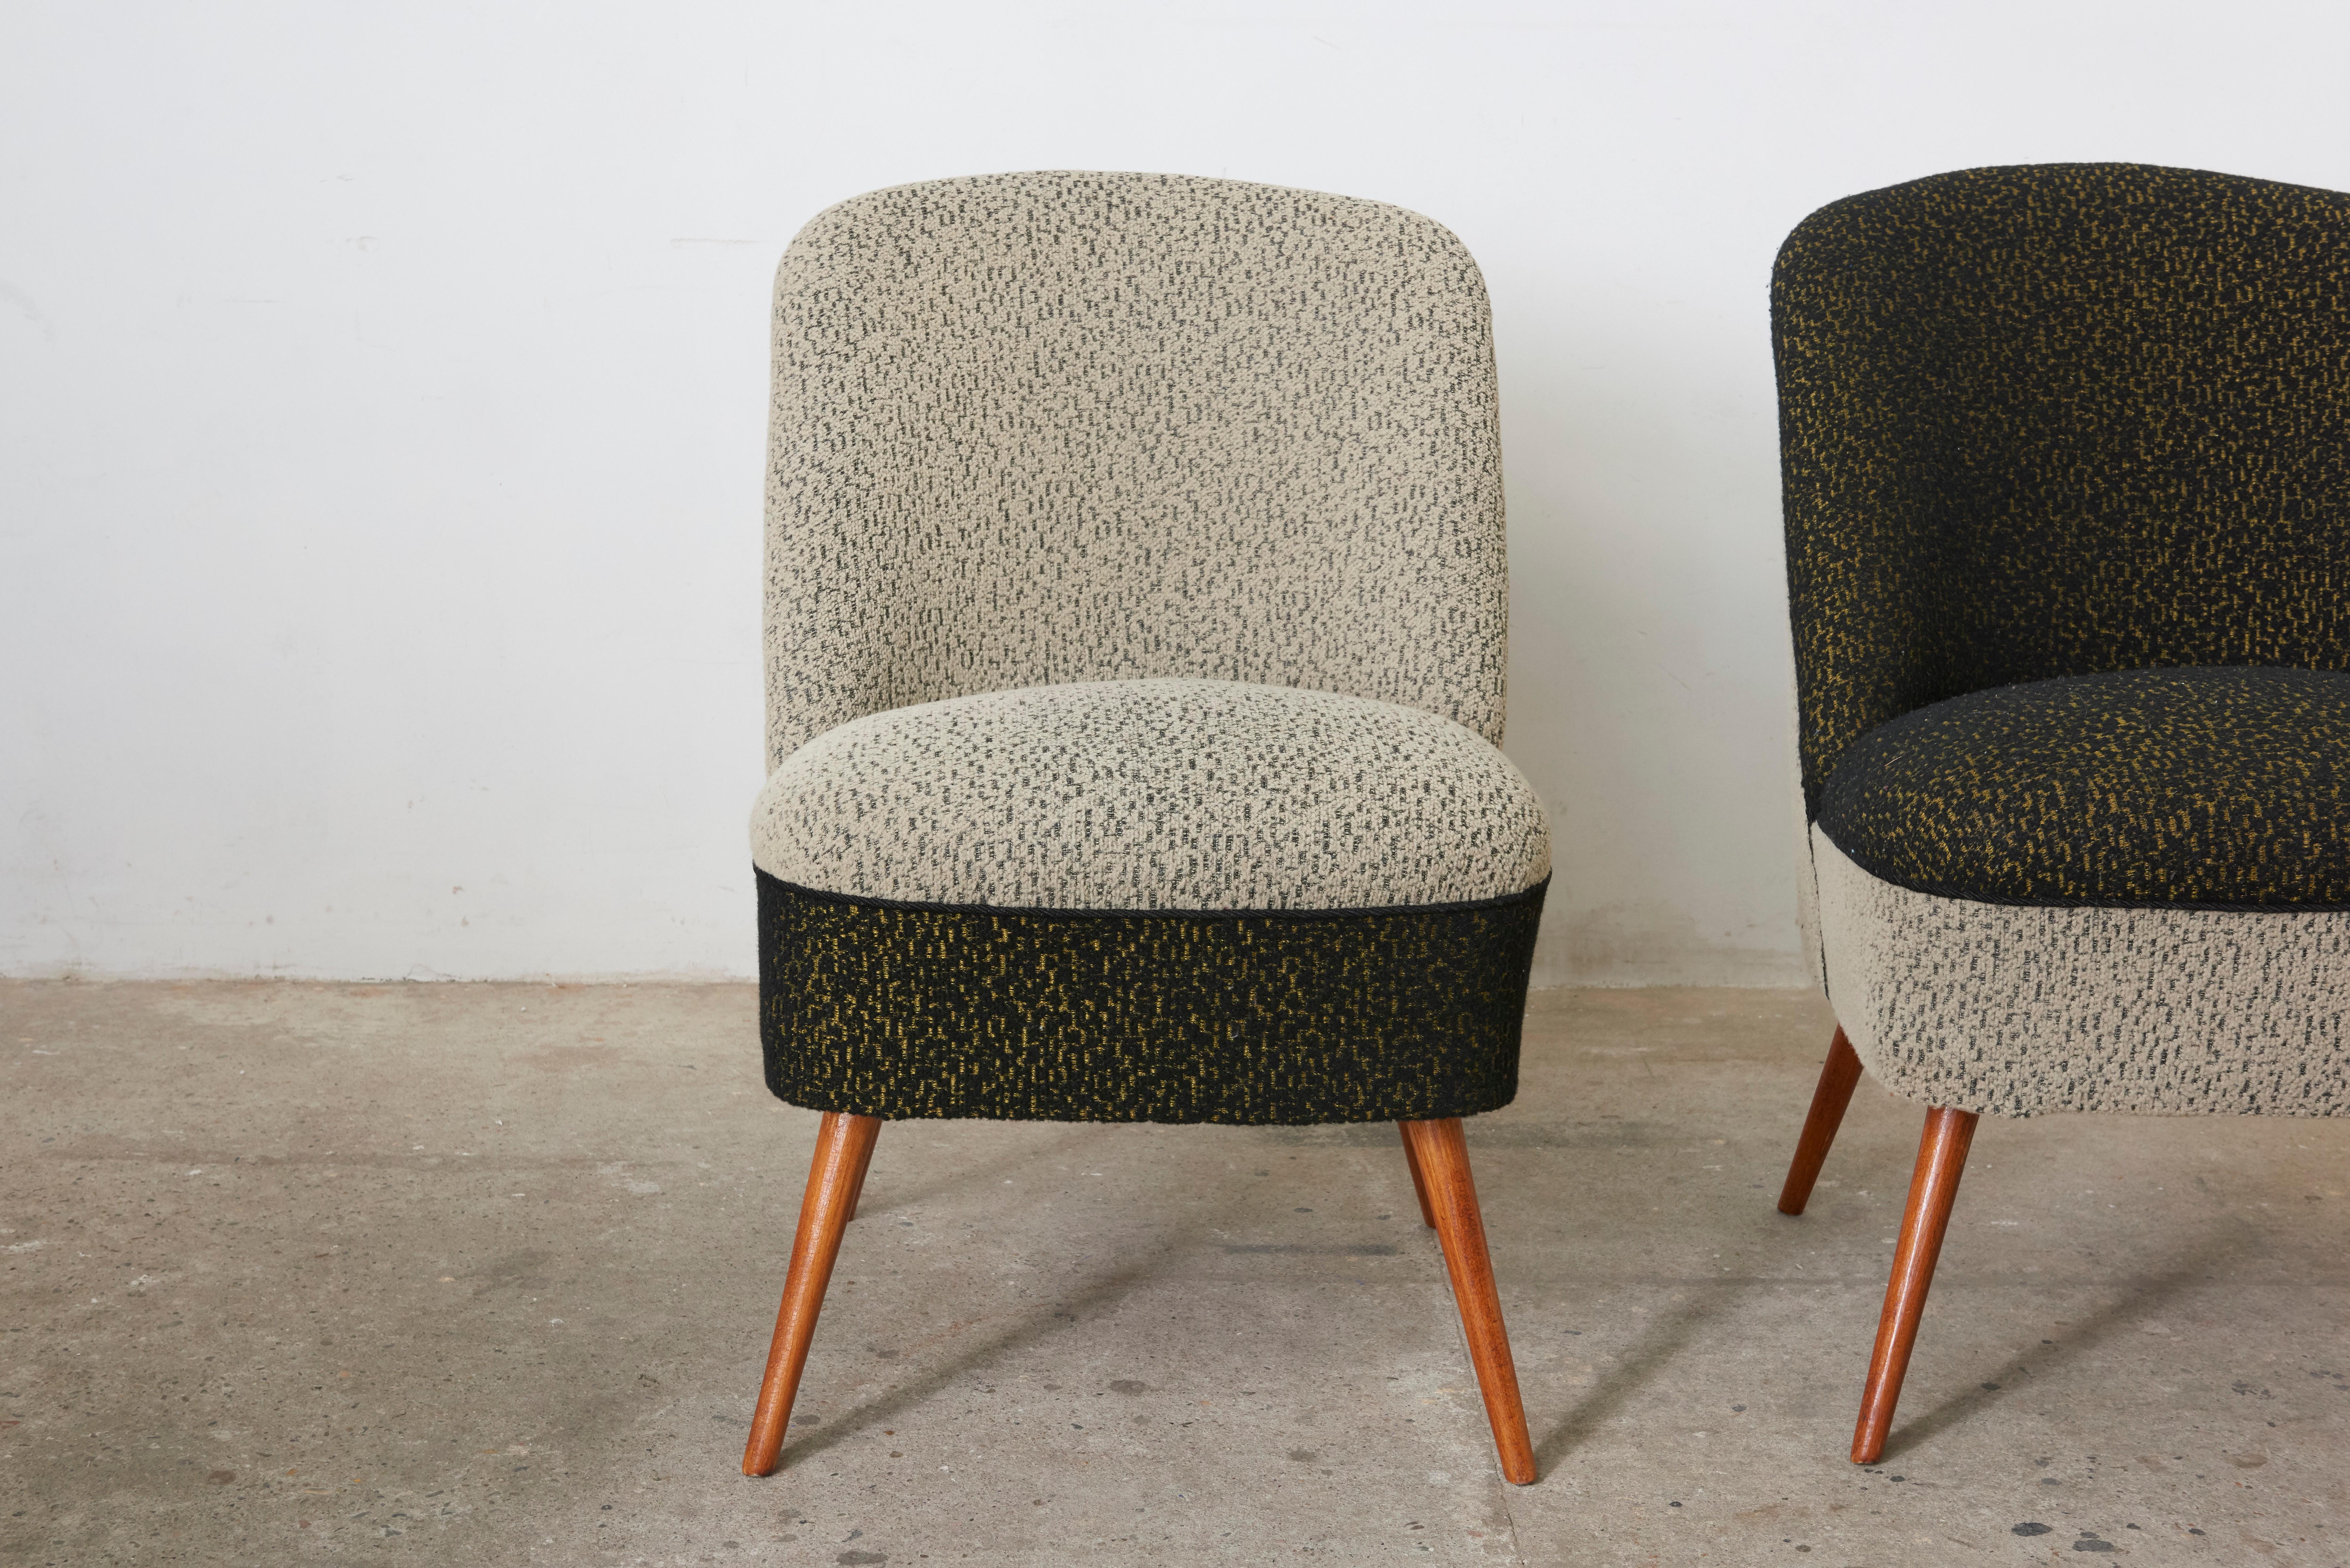 These vintage cocktail chairs have a super comfortable seat with the application of a padding technique, using double conical springs in the seat cushion but also in the backrest, coir filling supplemented the suppleness of these springs the chairs